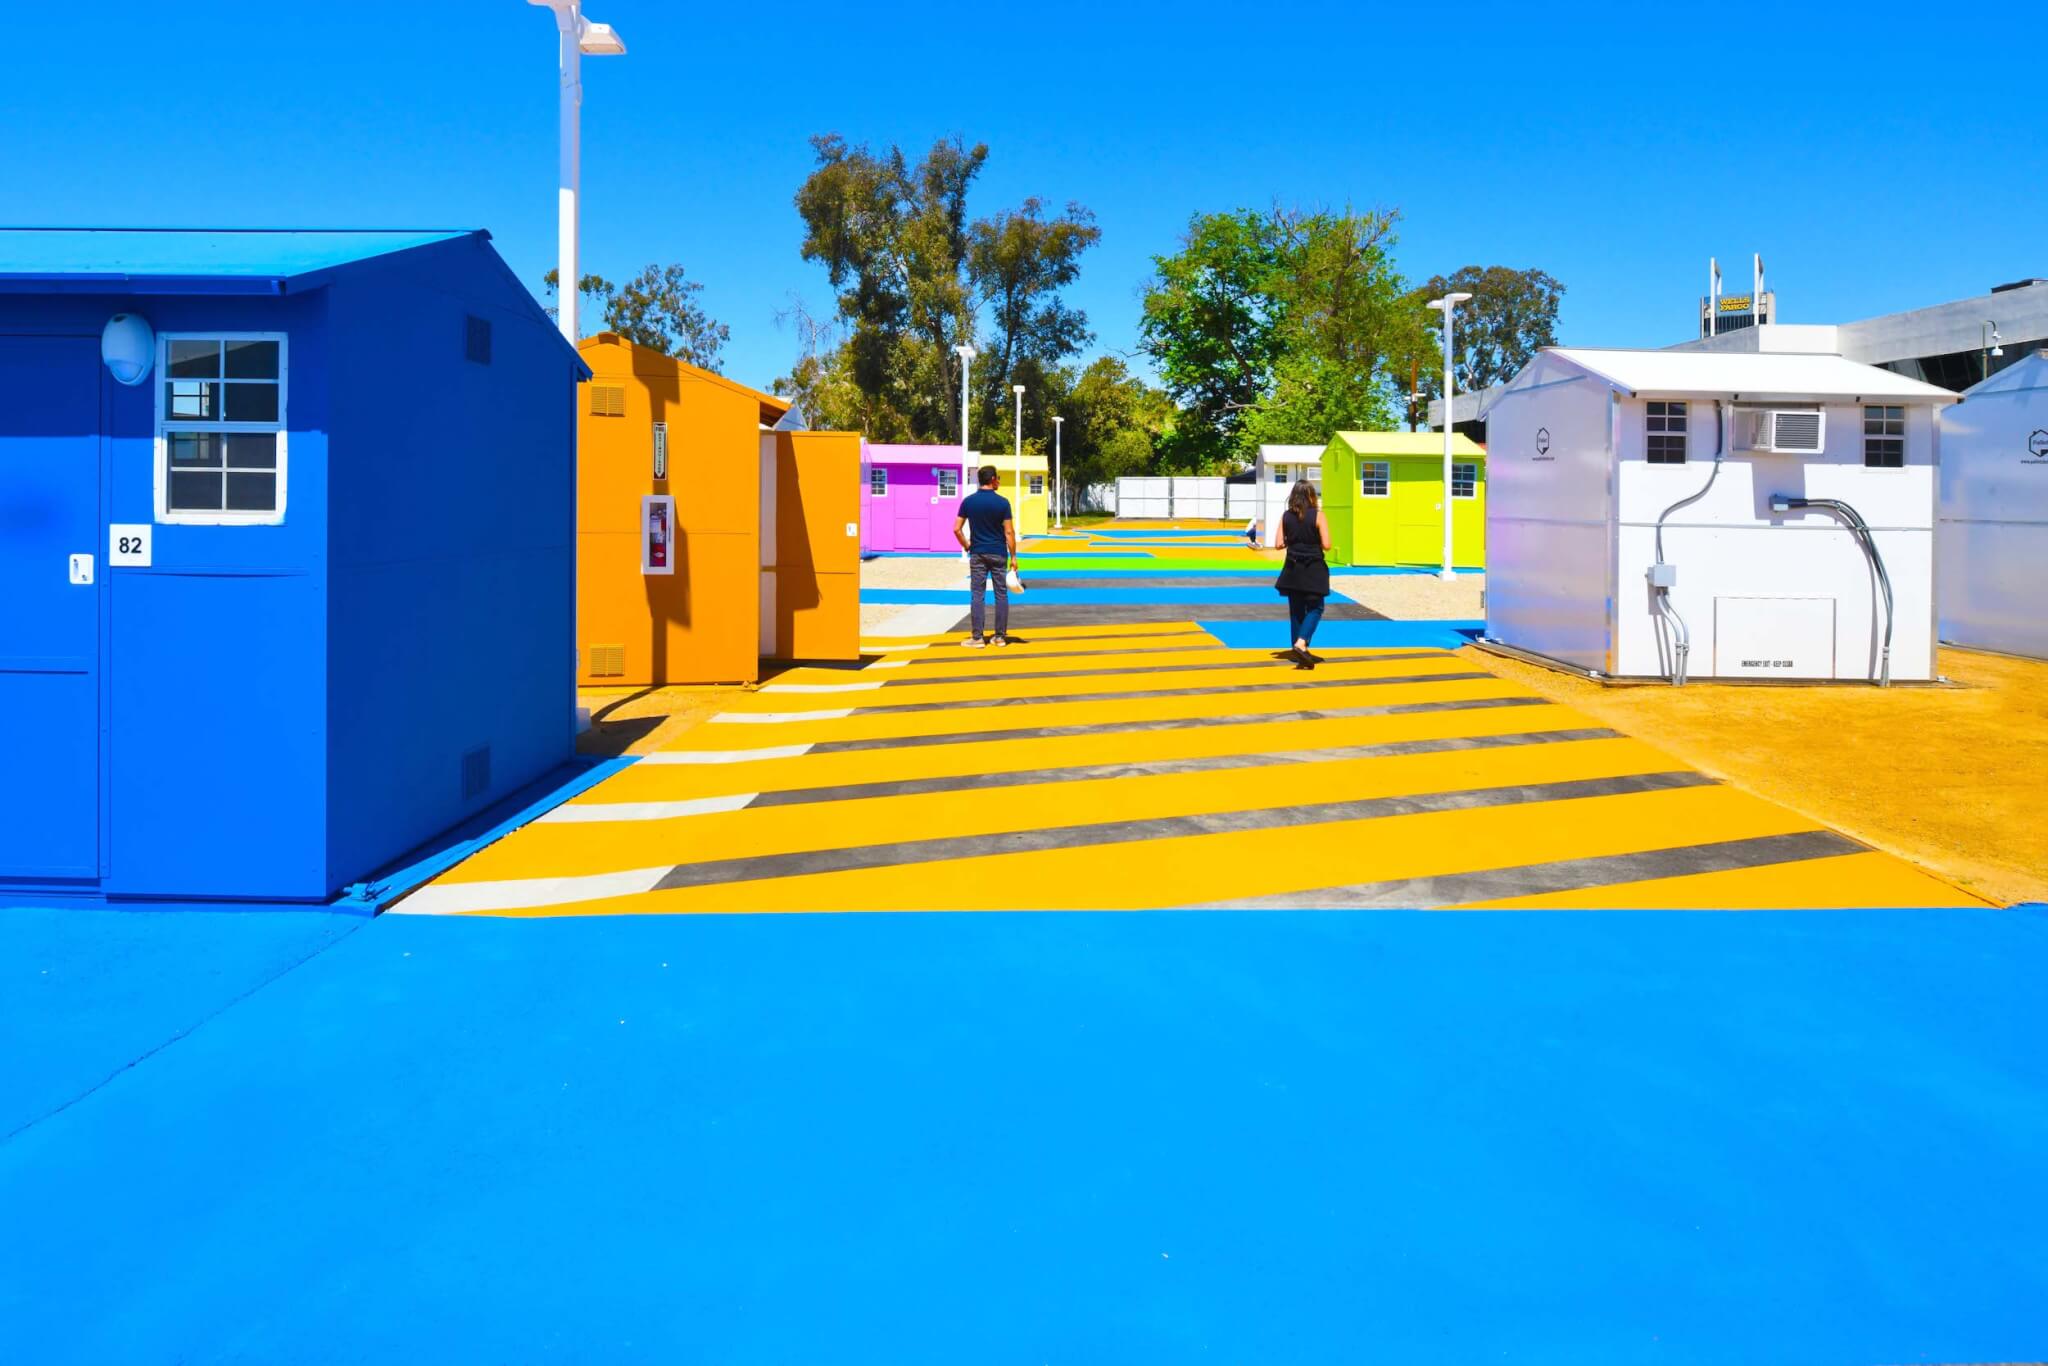 bright blue and yellow supergraphics at a tiny house village